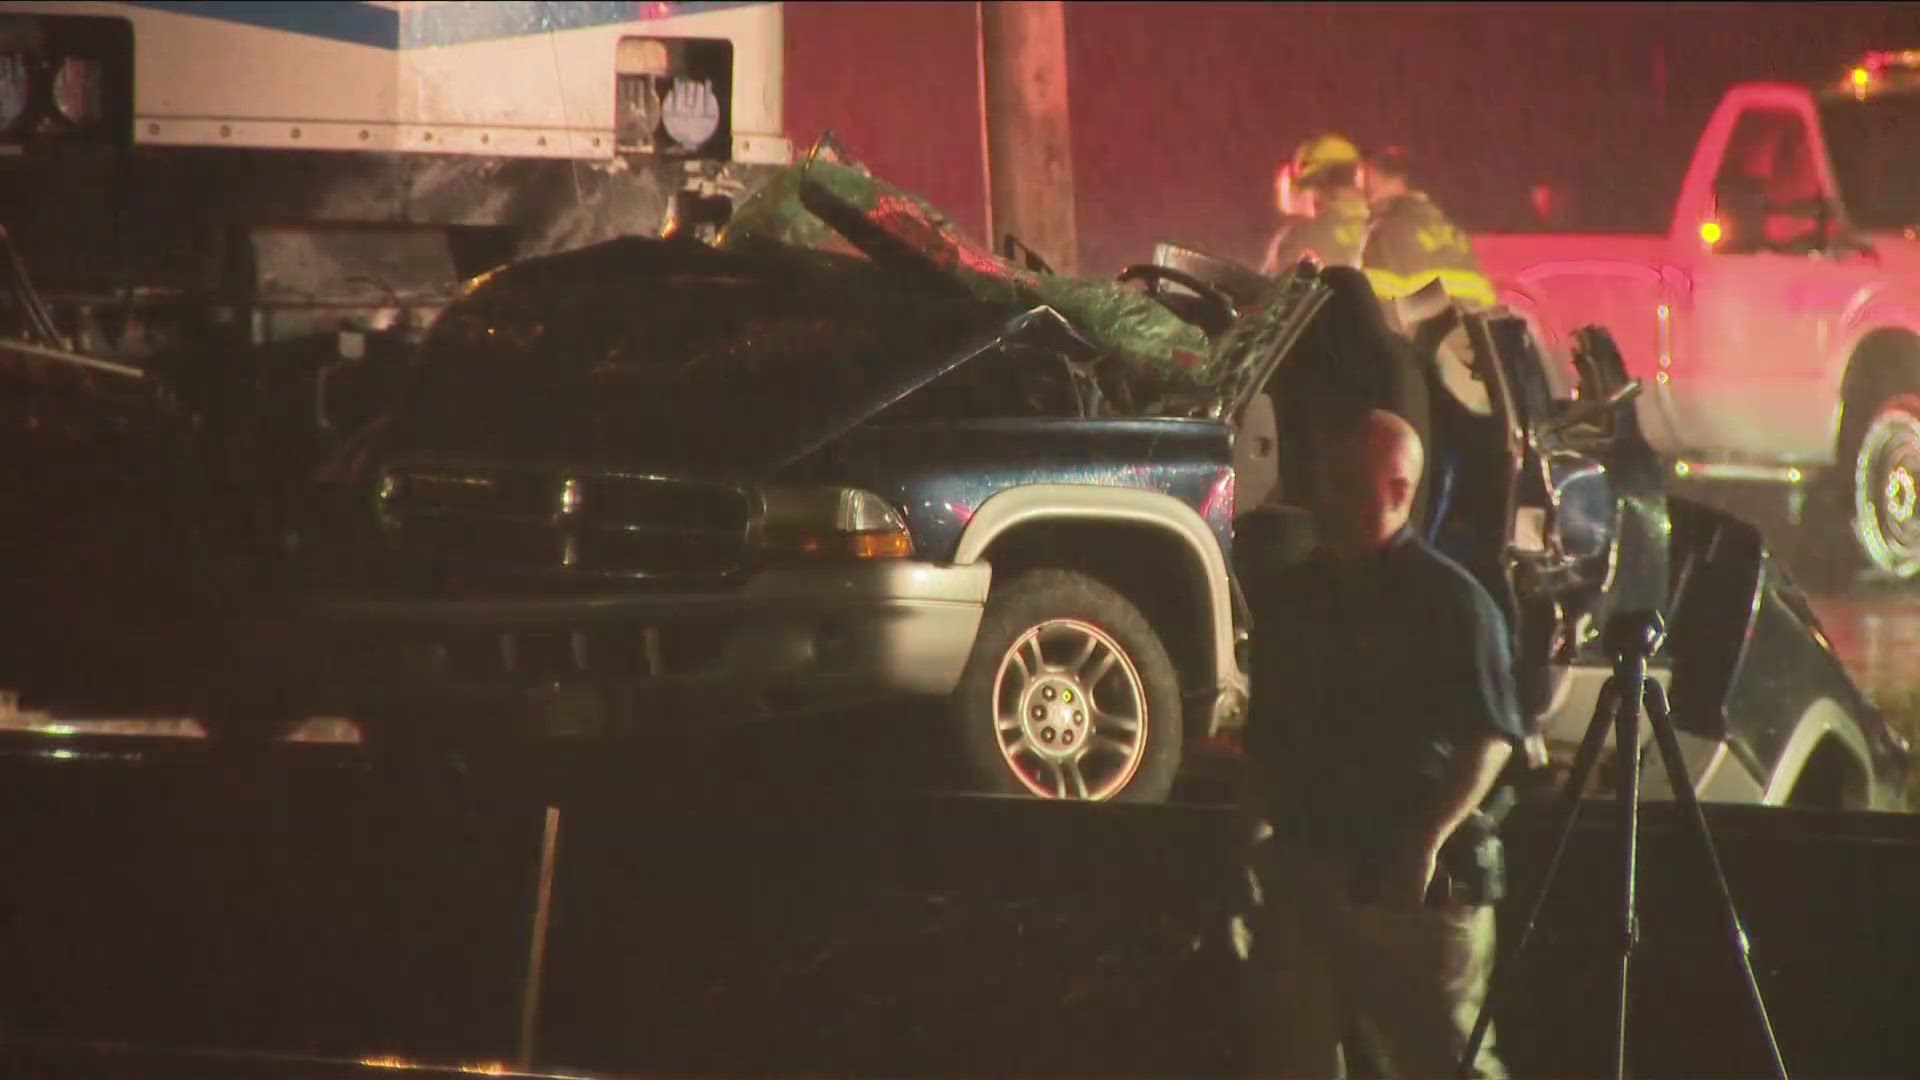 Three people were killed Friday evening when a train collided with a pickup truck on Felton Street.